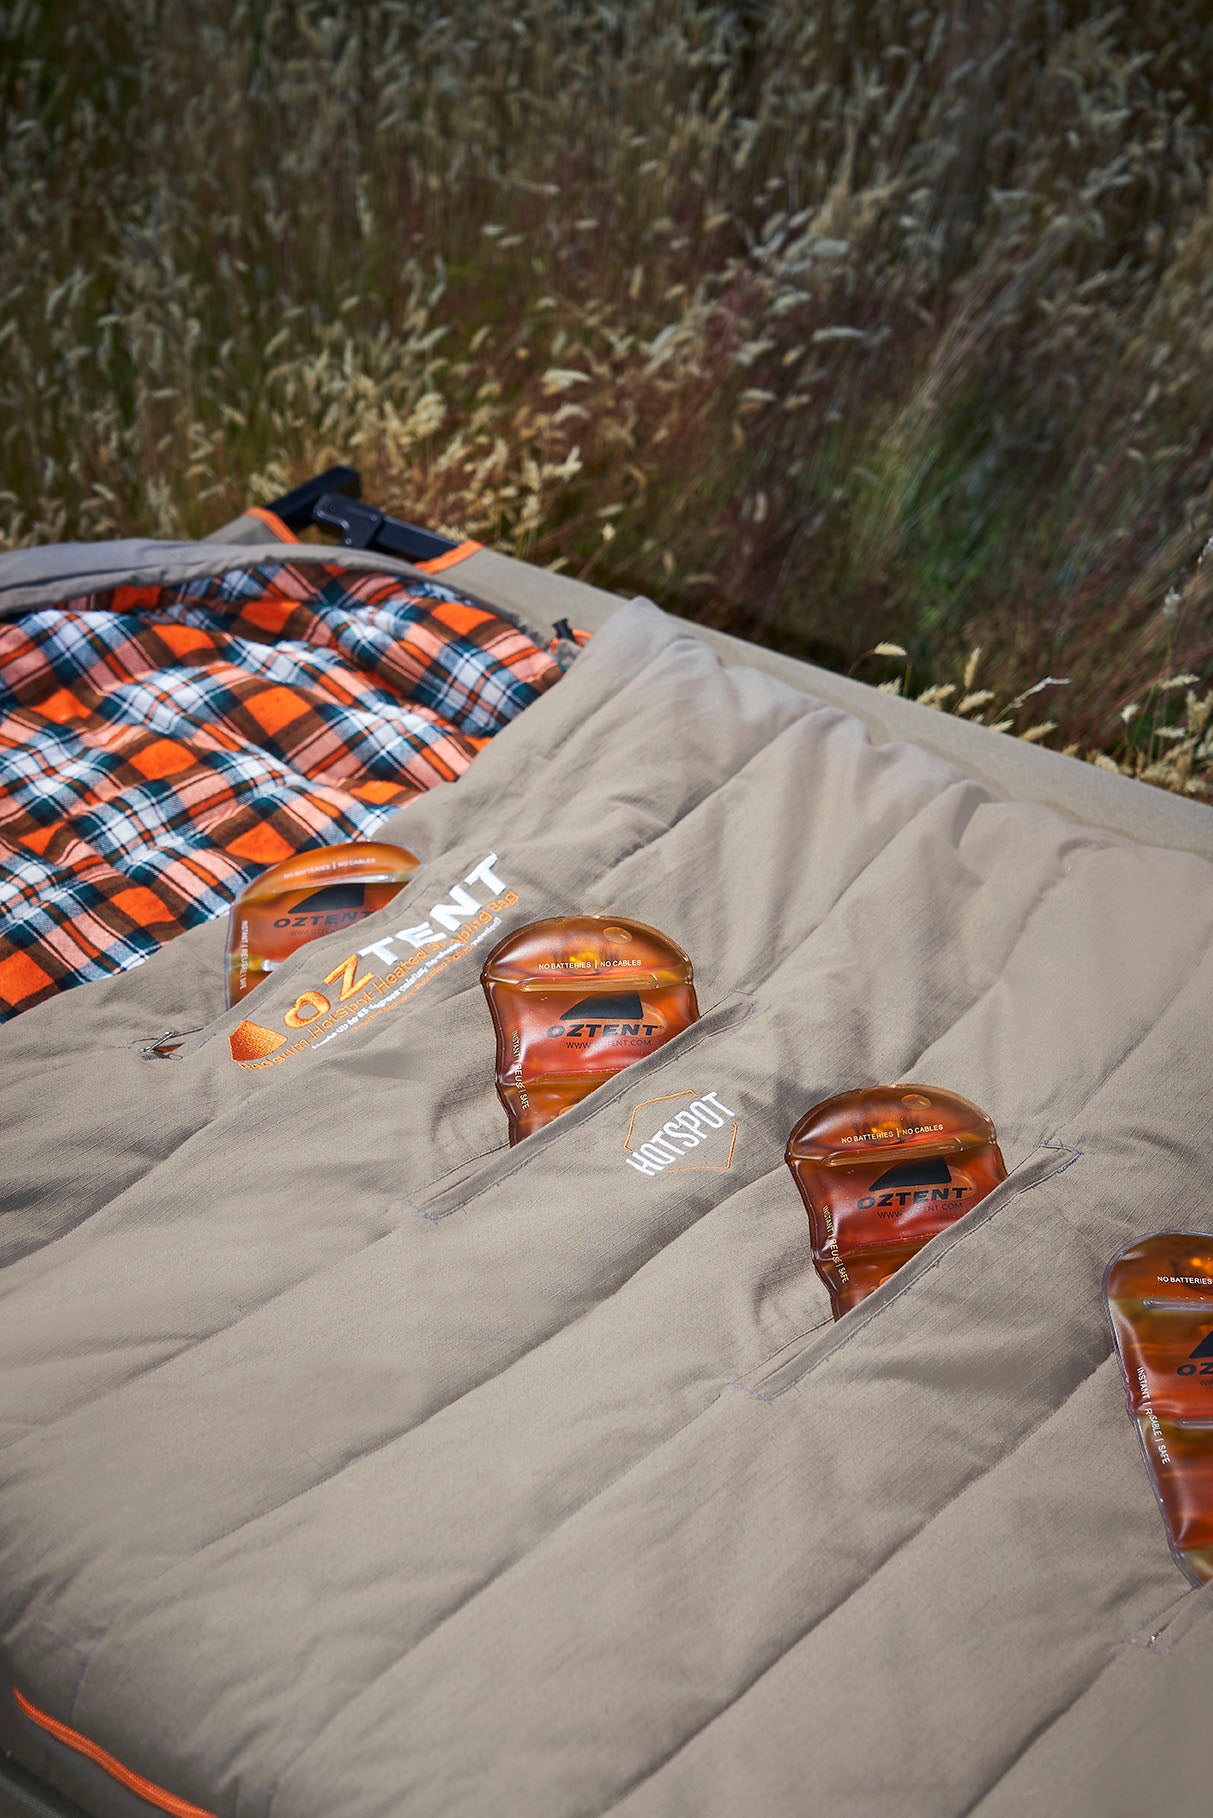 The world's first non-electric heat adjustable sleeping bag